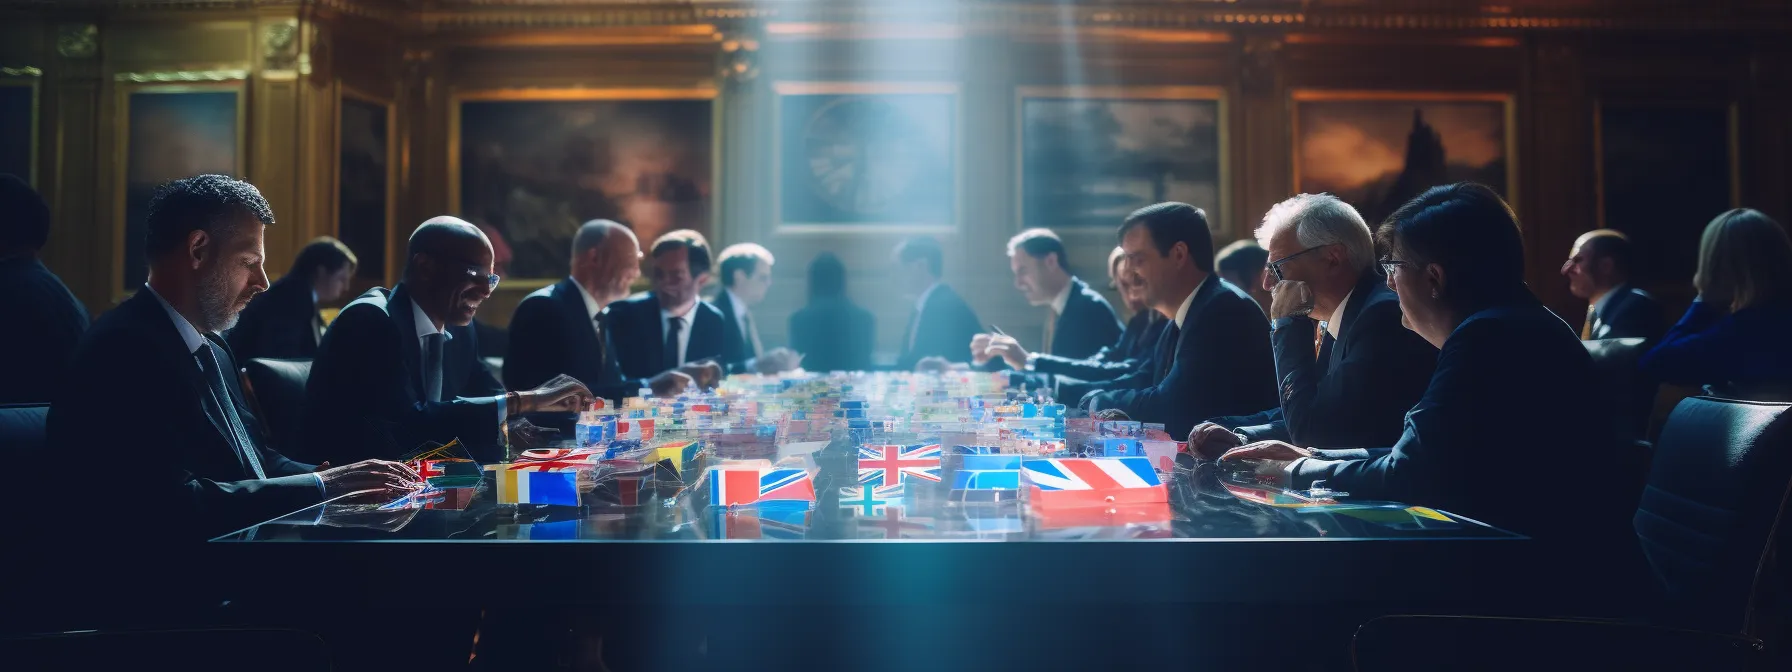 arbitrators strategize amidst a swirling mosaic of global flags and geopolitical maps.